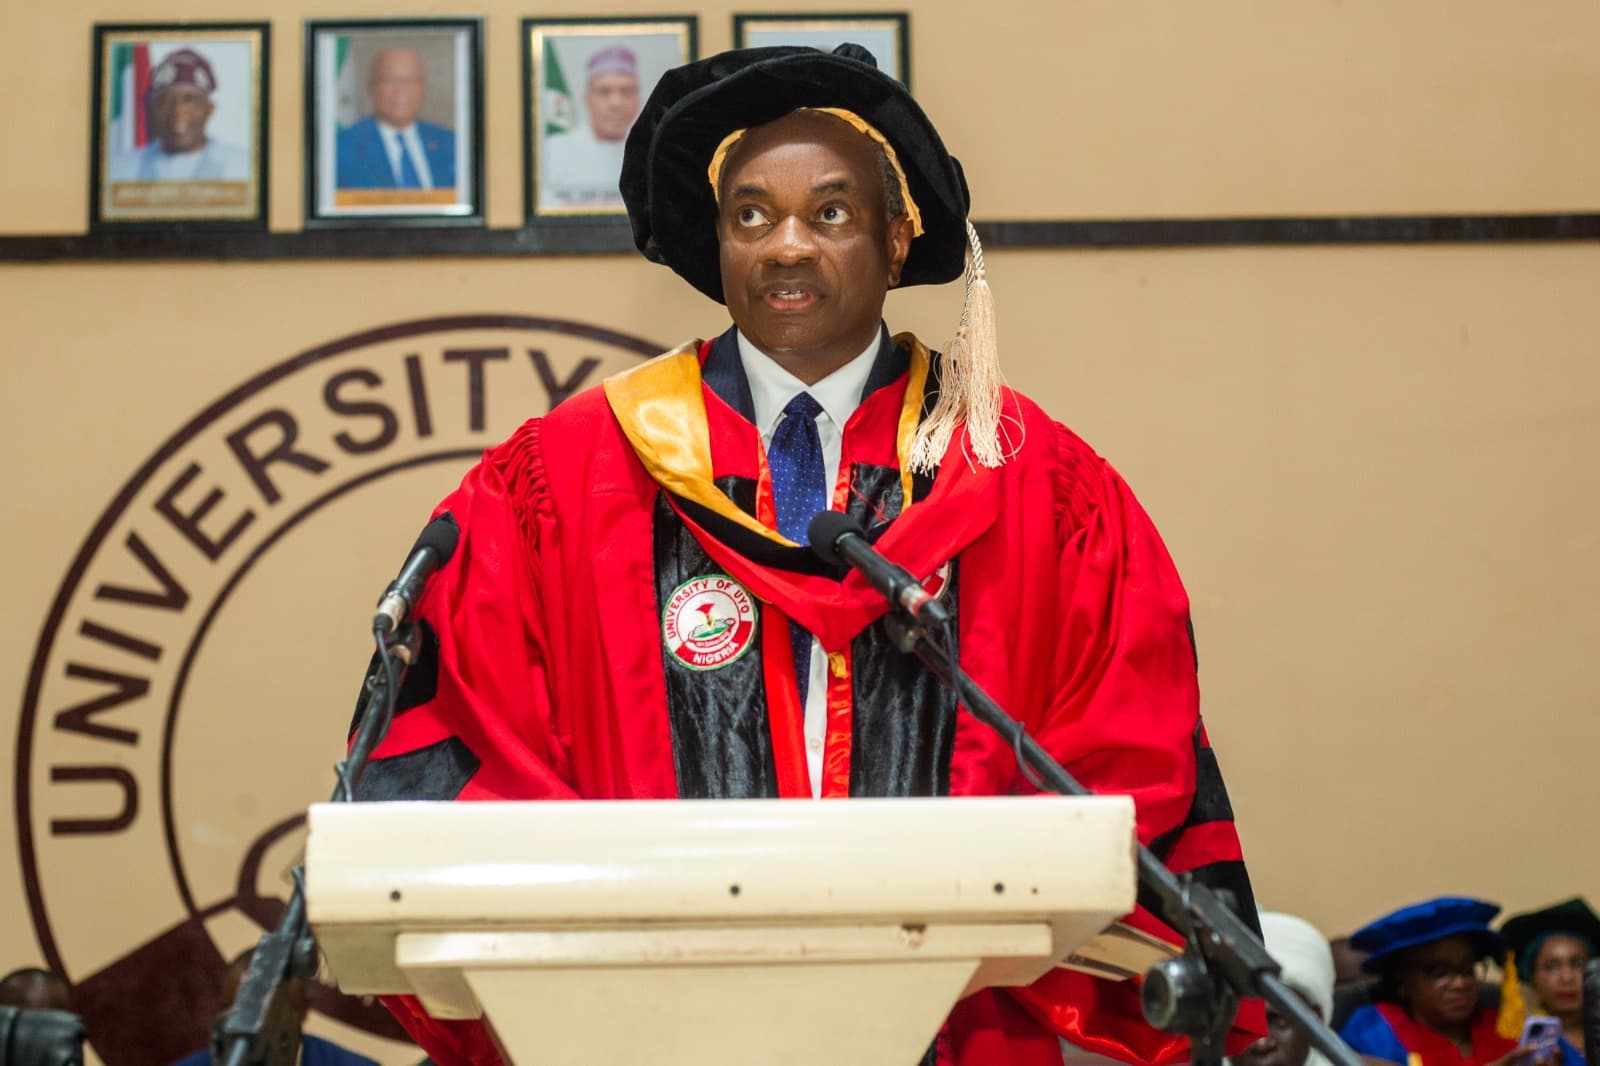 Dr. Udom Inoyo giving his speech at the ceremony